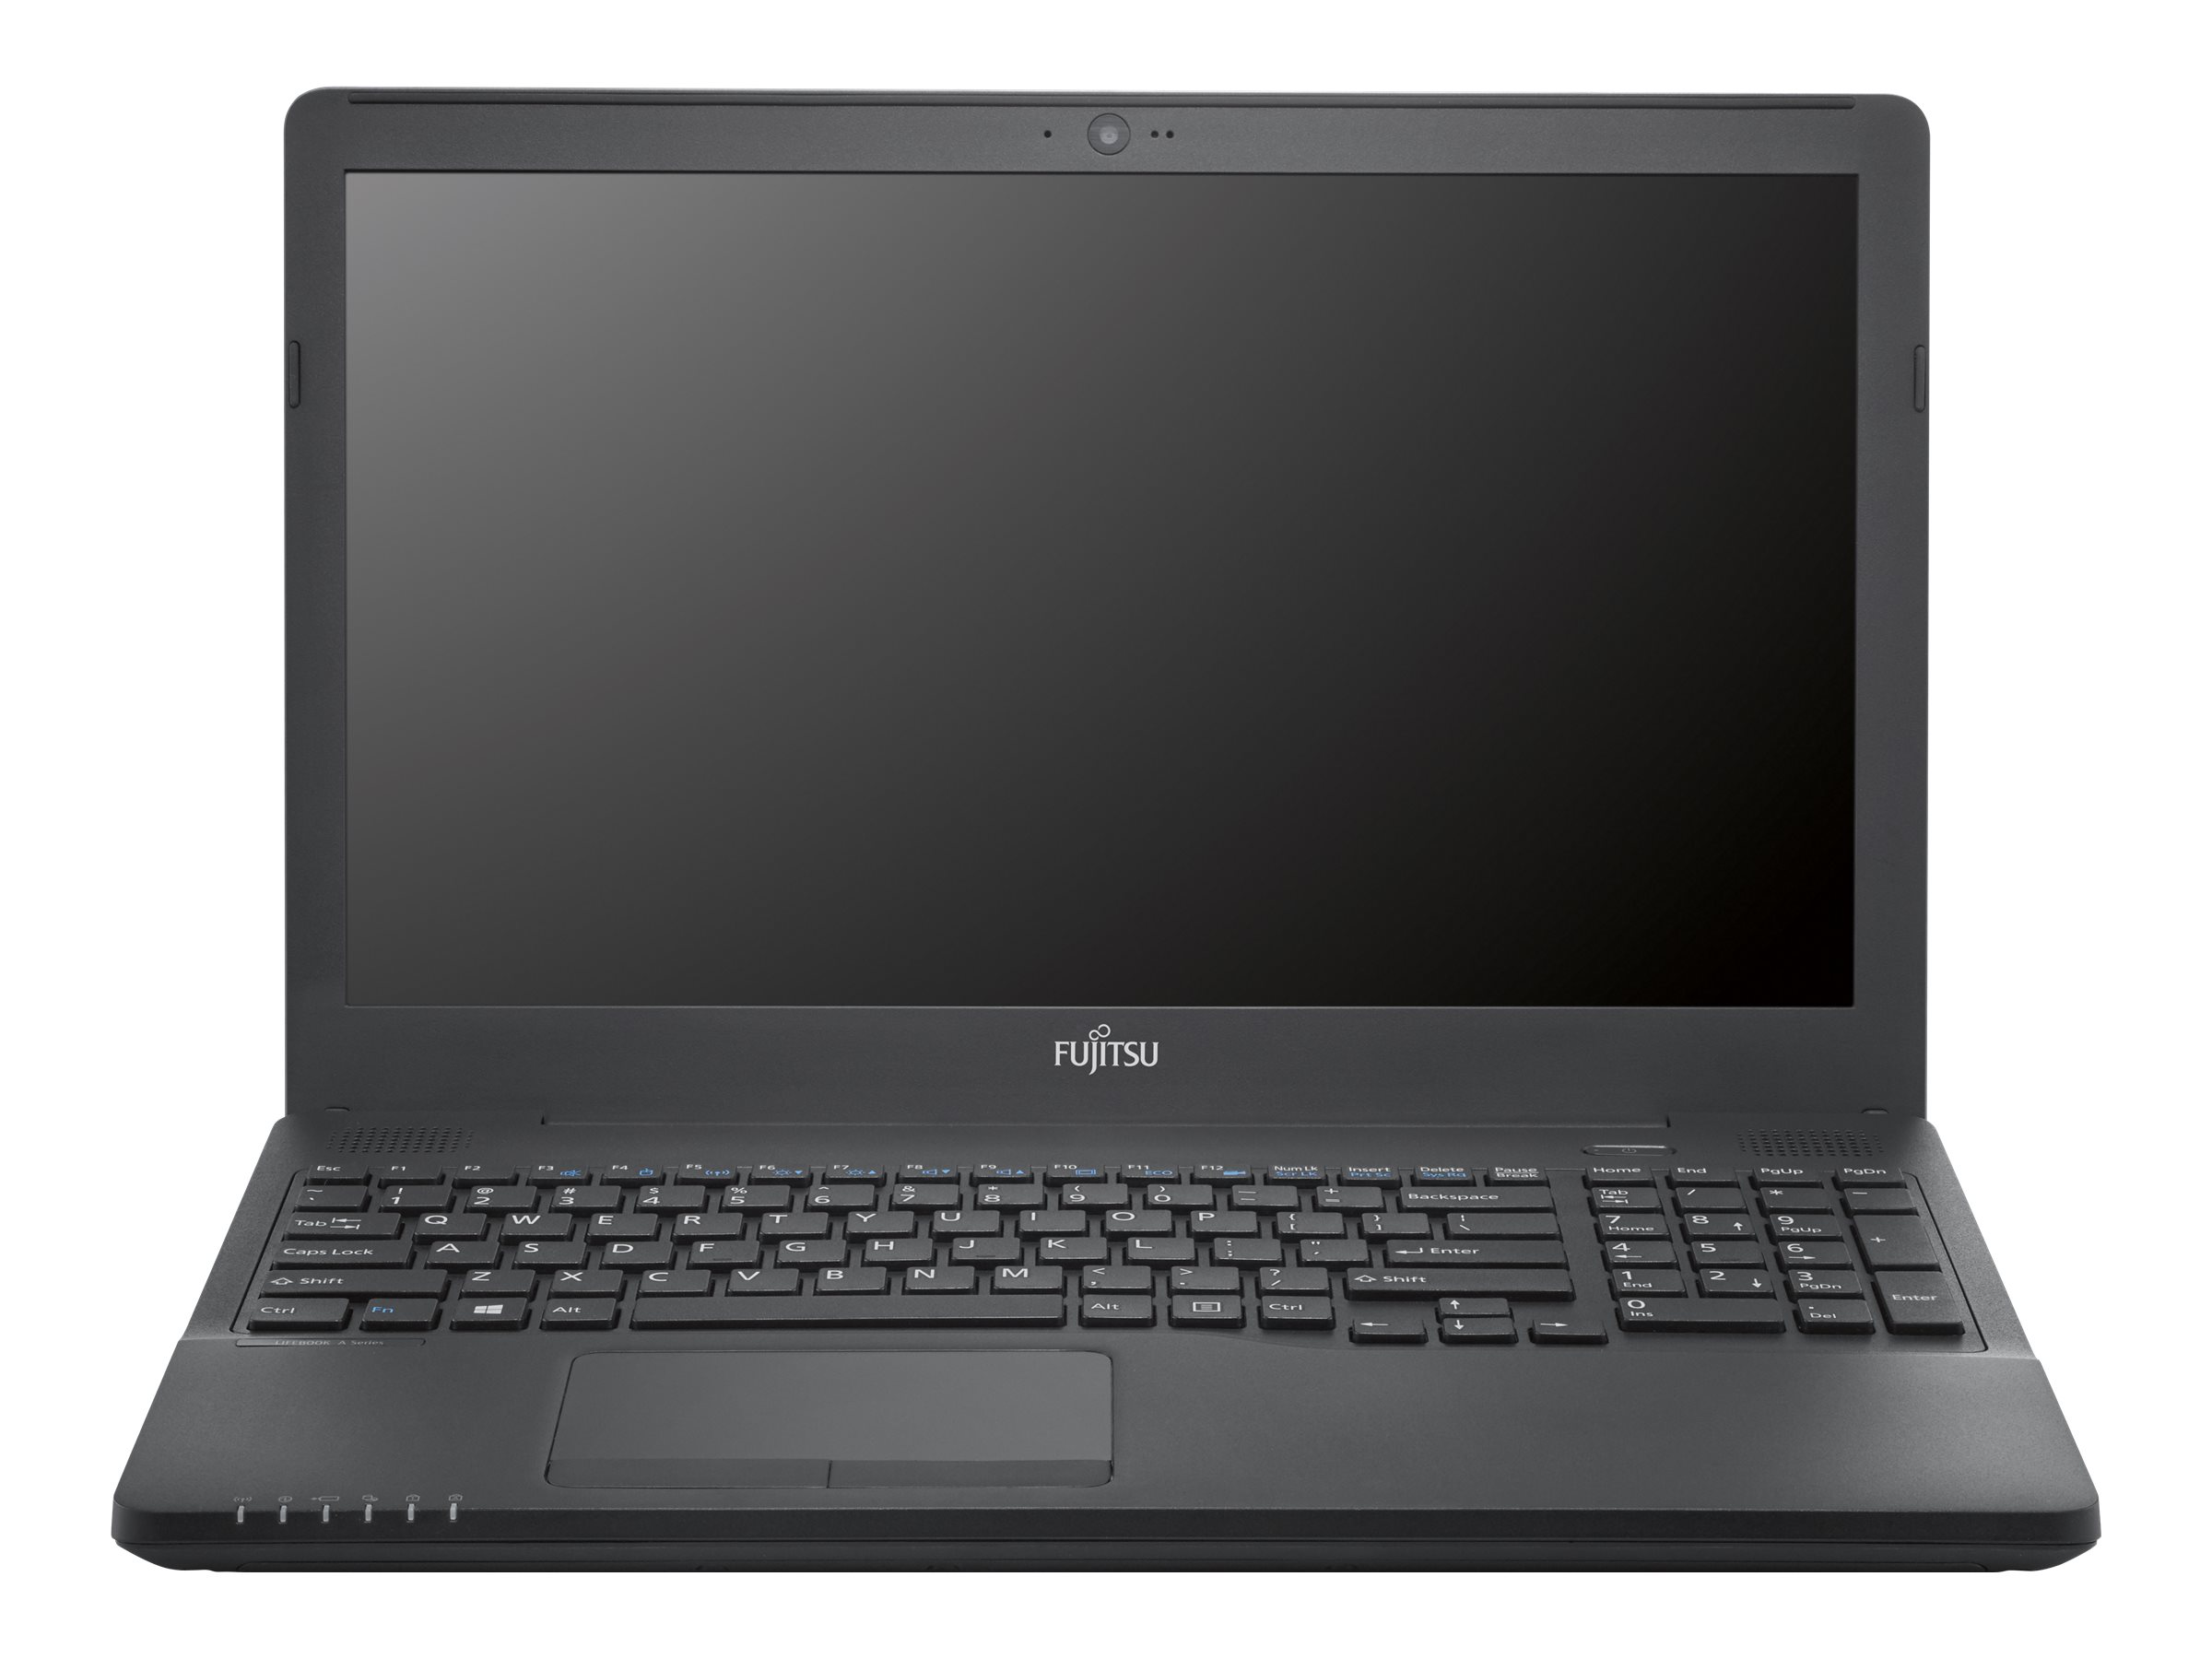 Fujitsu LIFEBOOK A557 - full specs, details and review